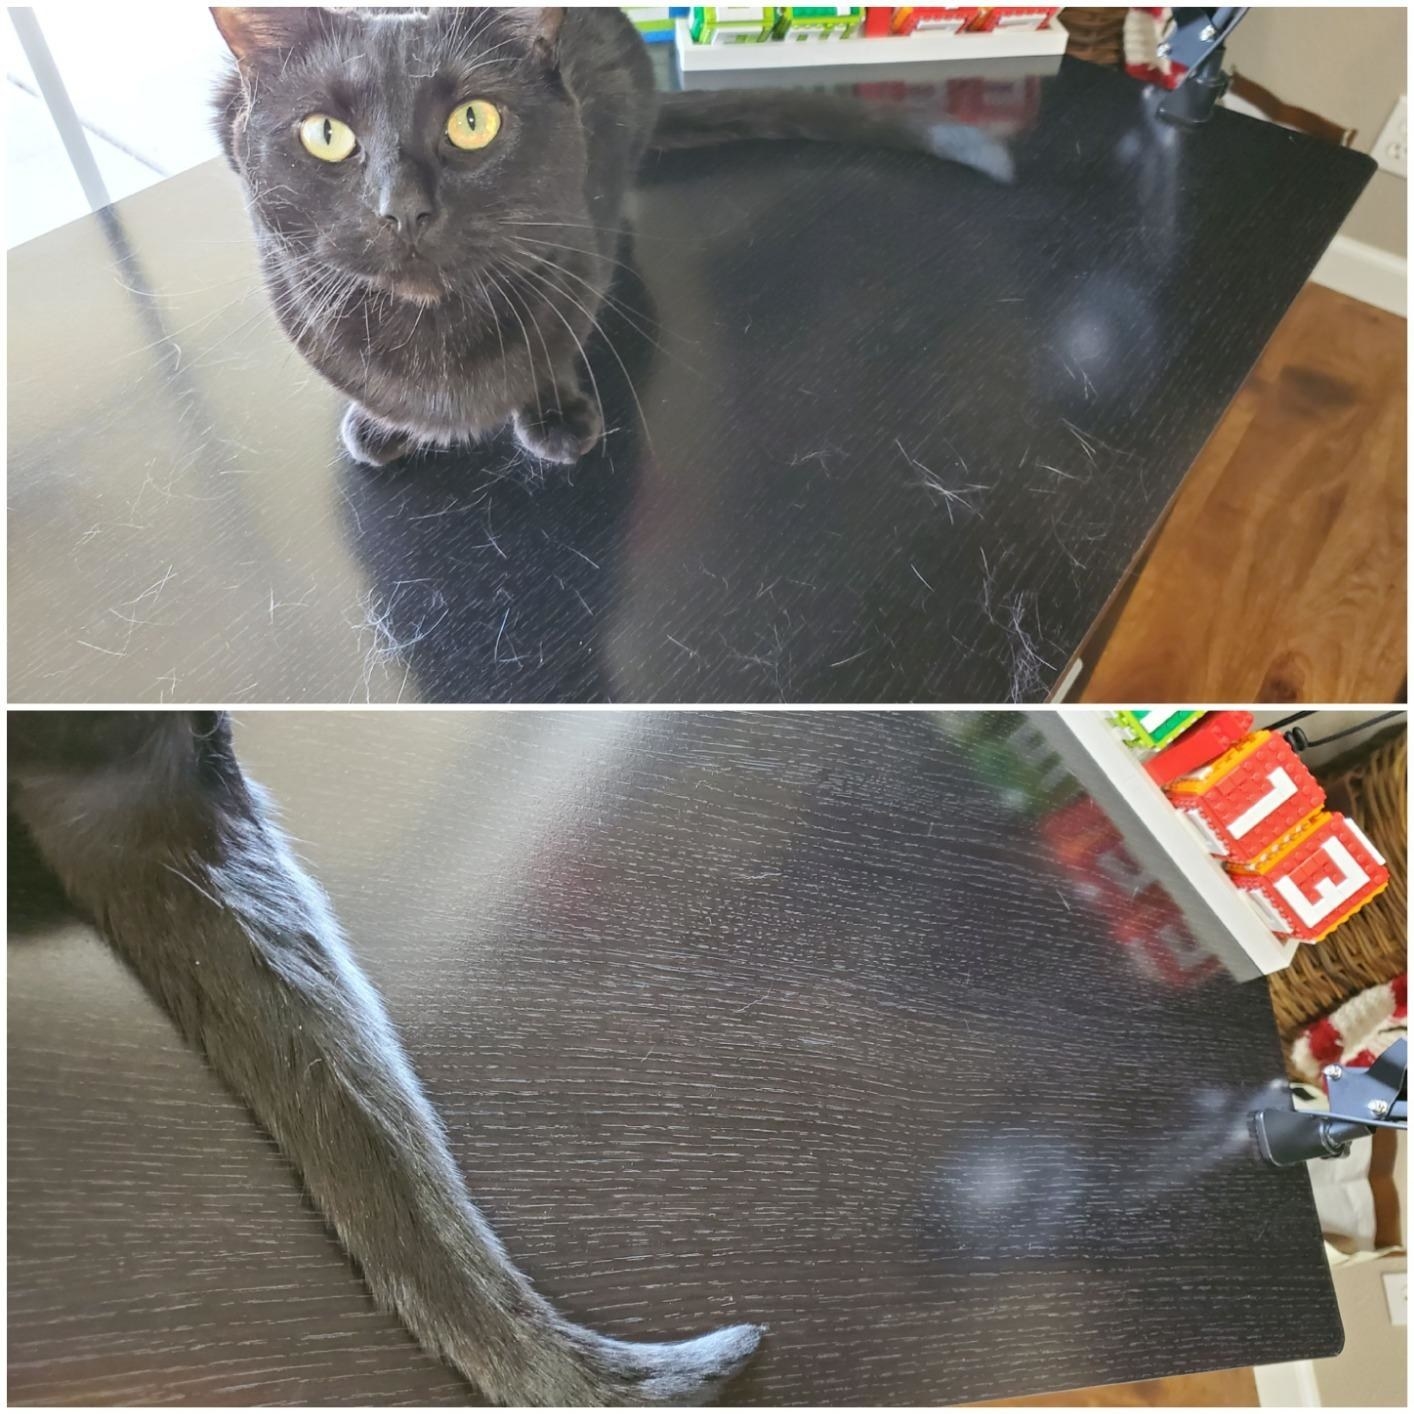 A reviewer before and after photo of a desk with cat fur and then without it